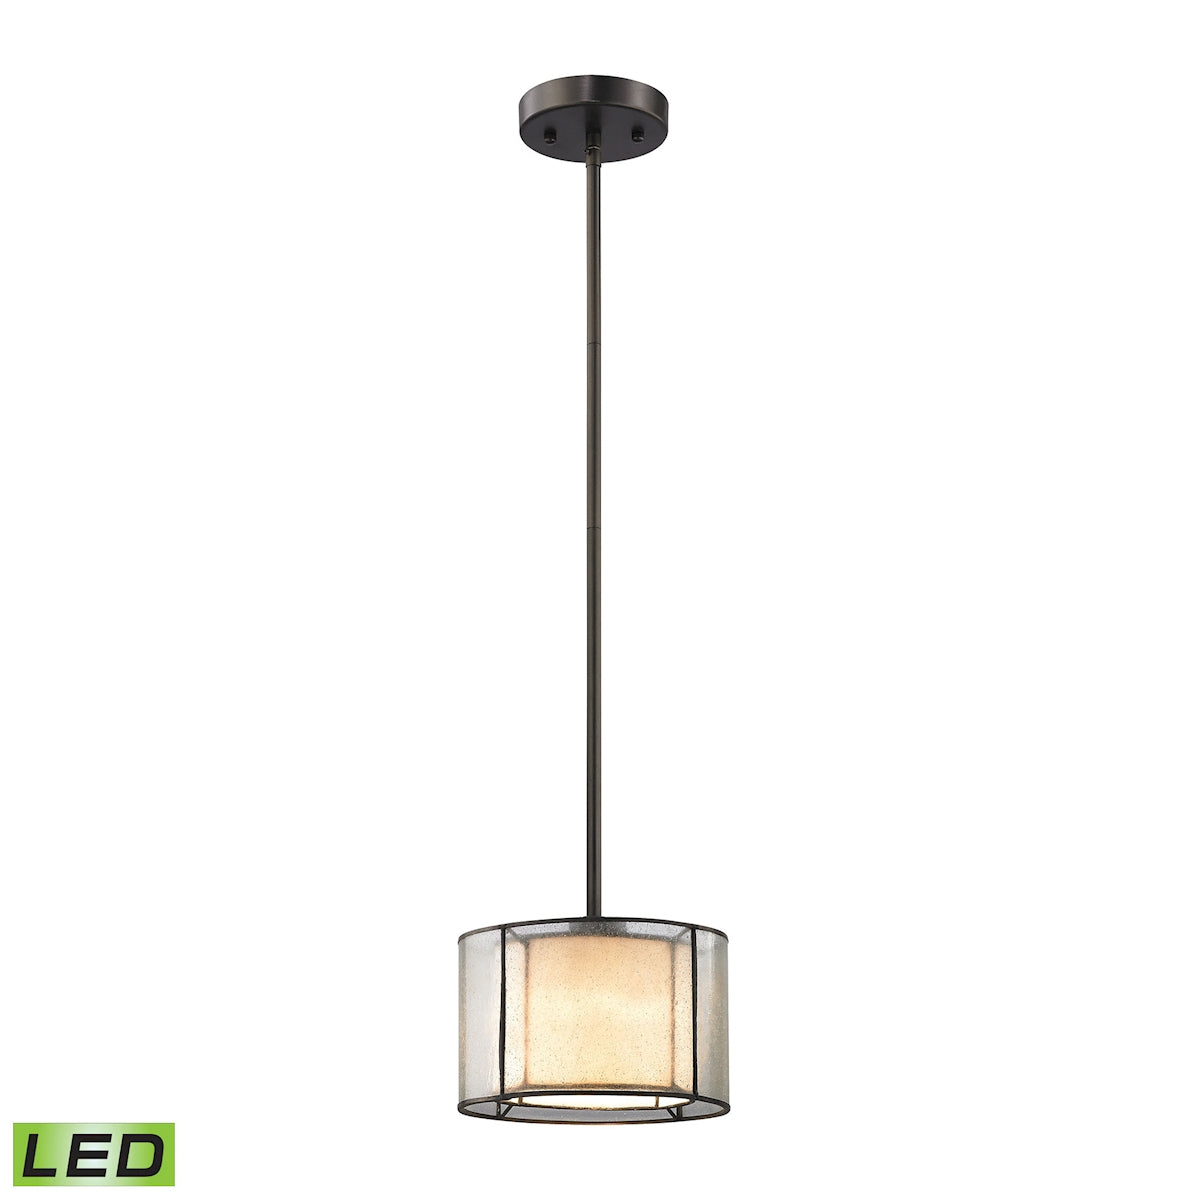 ELK Lighting 70224/1-LED Mirage 1-Light Mini Pendant in Tiffany Bronze with Seedy and Amber Art Glass - Includes LED Bulb